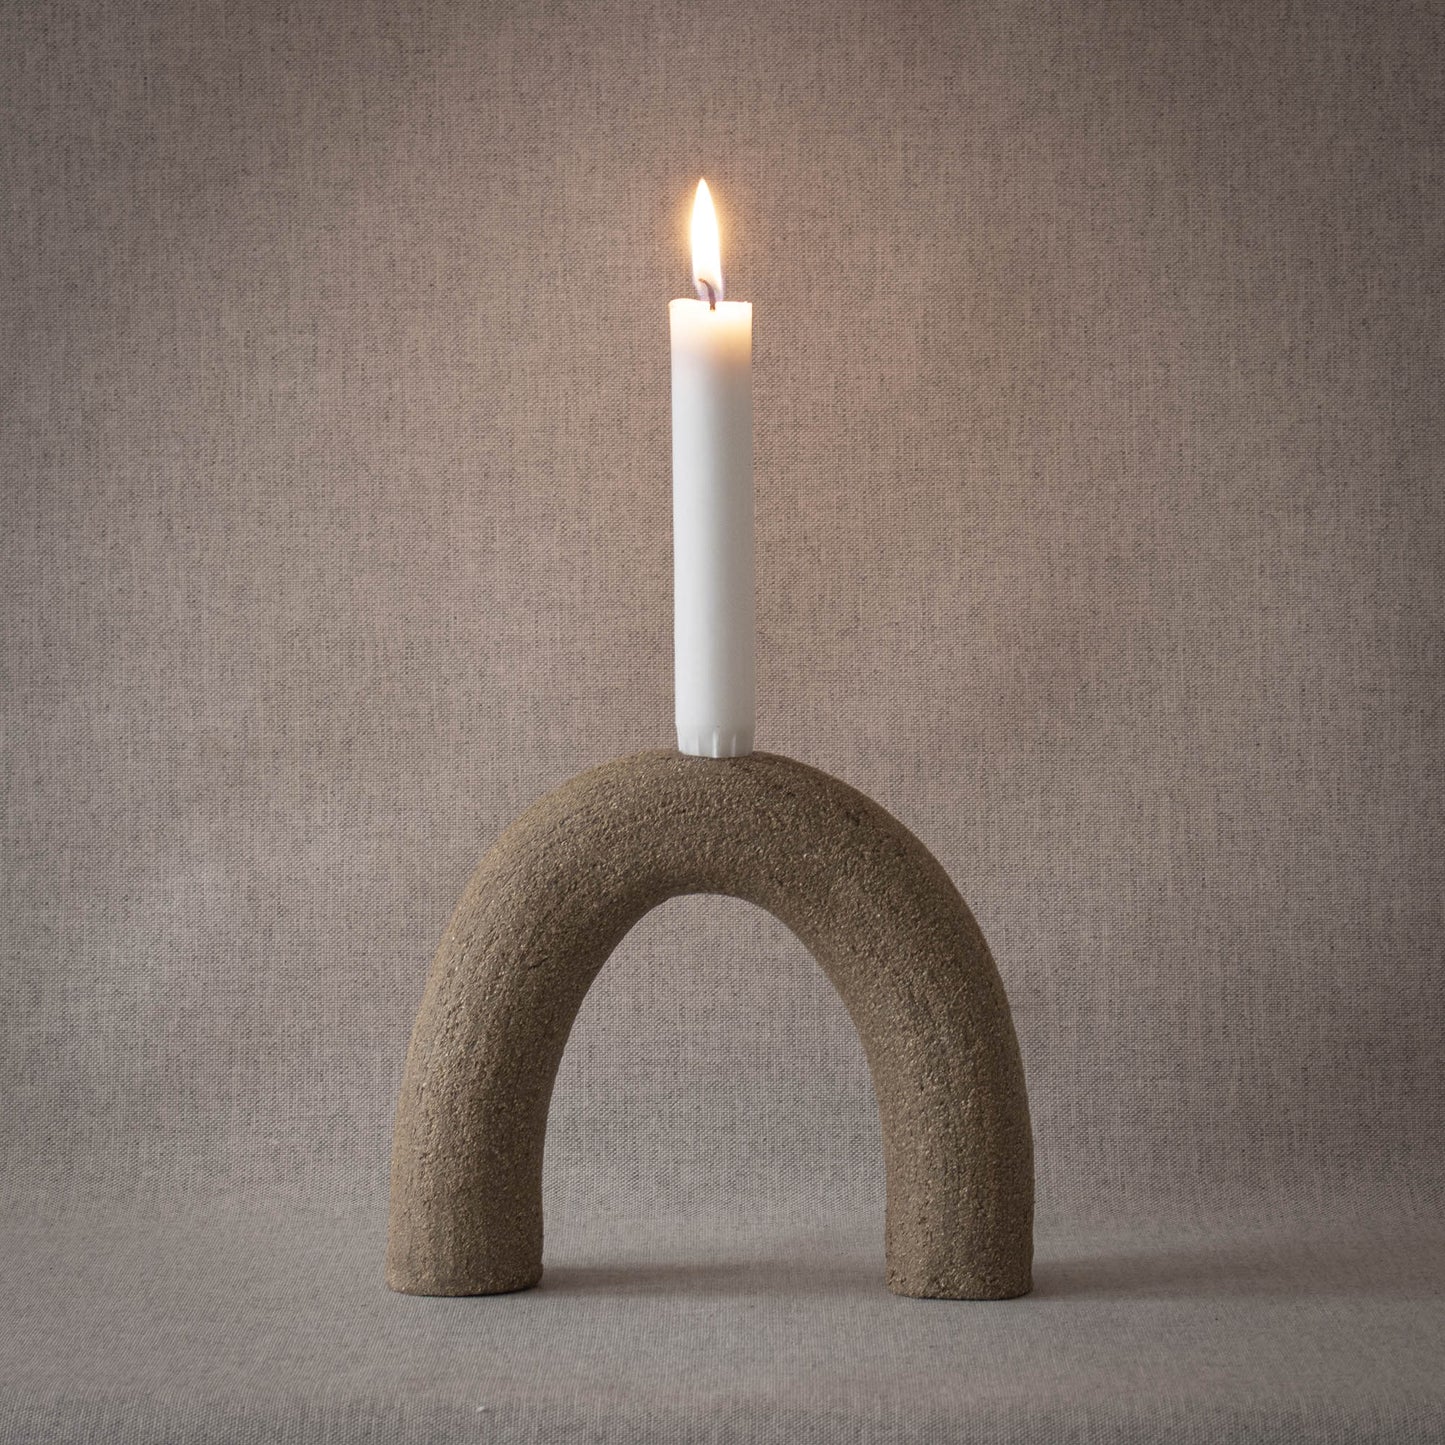 Candlestick Arc, 1 candle